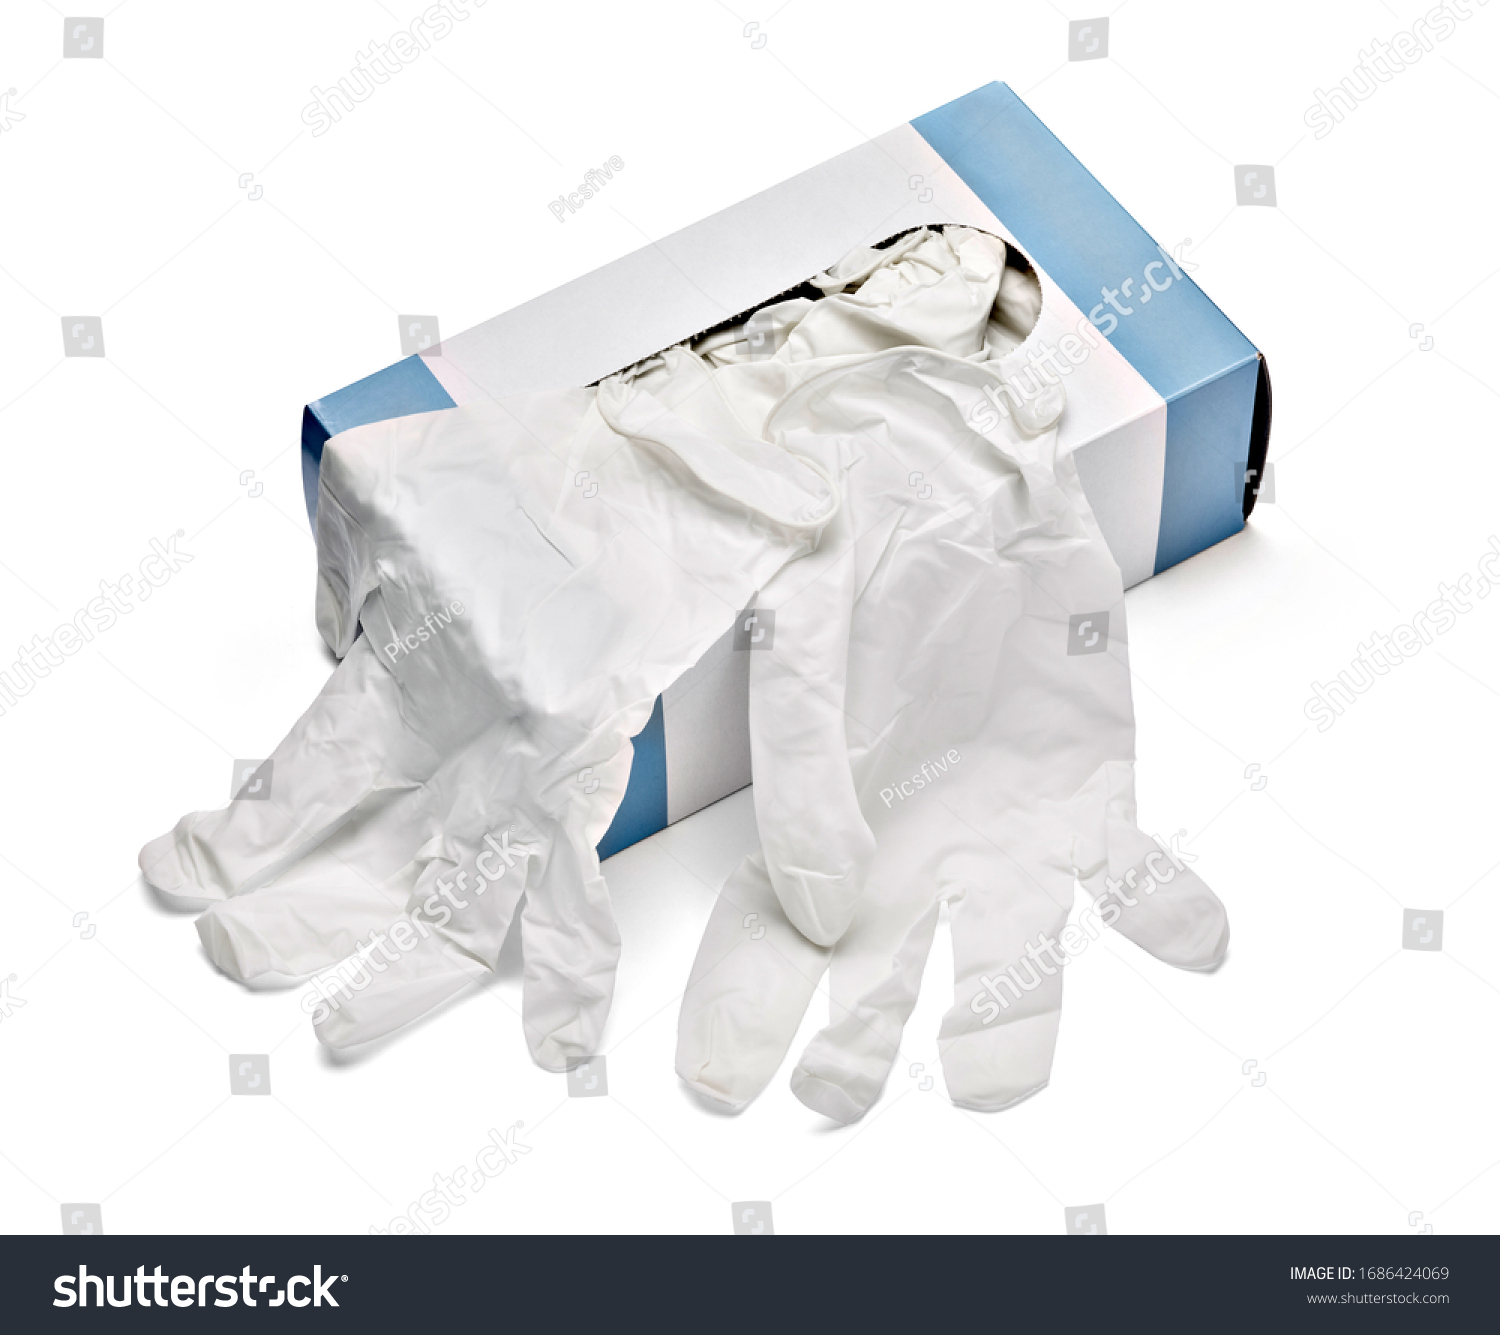 close up of a box of white latex protective gloves on white background #1686424069